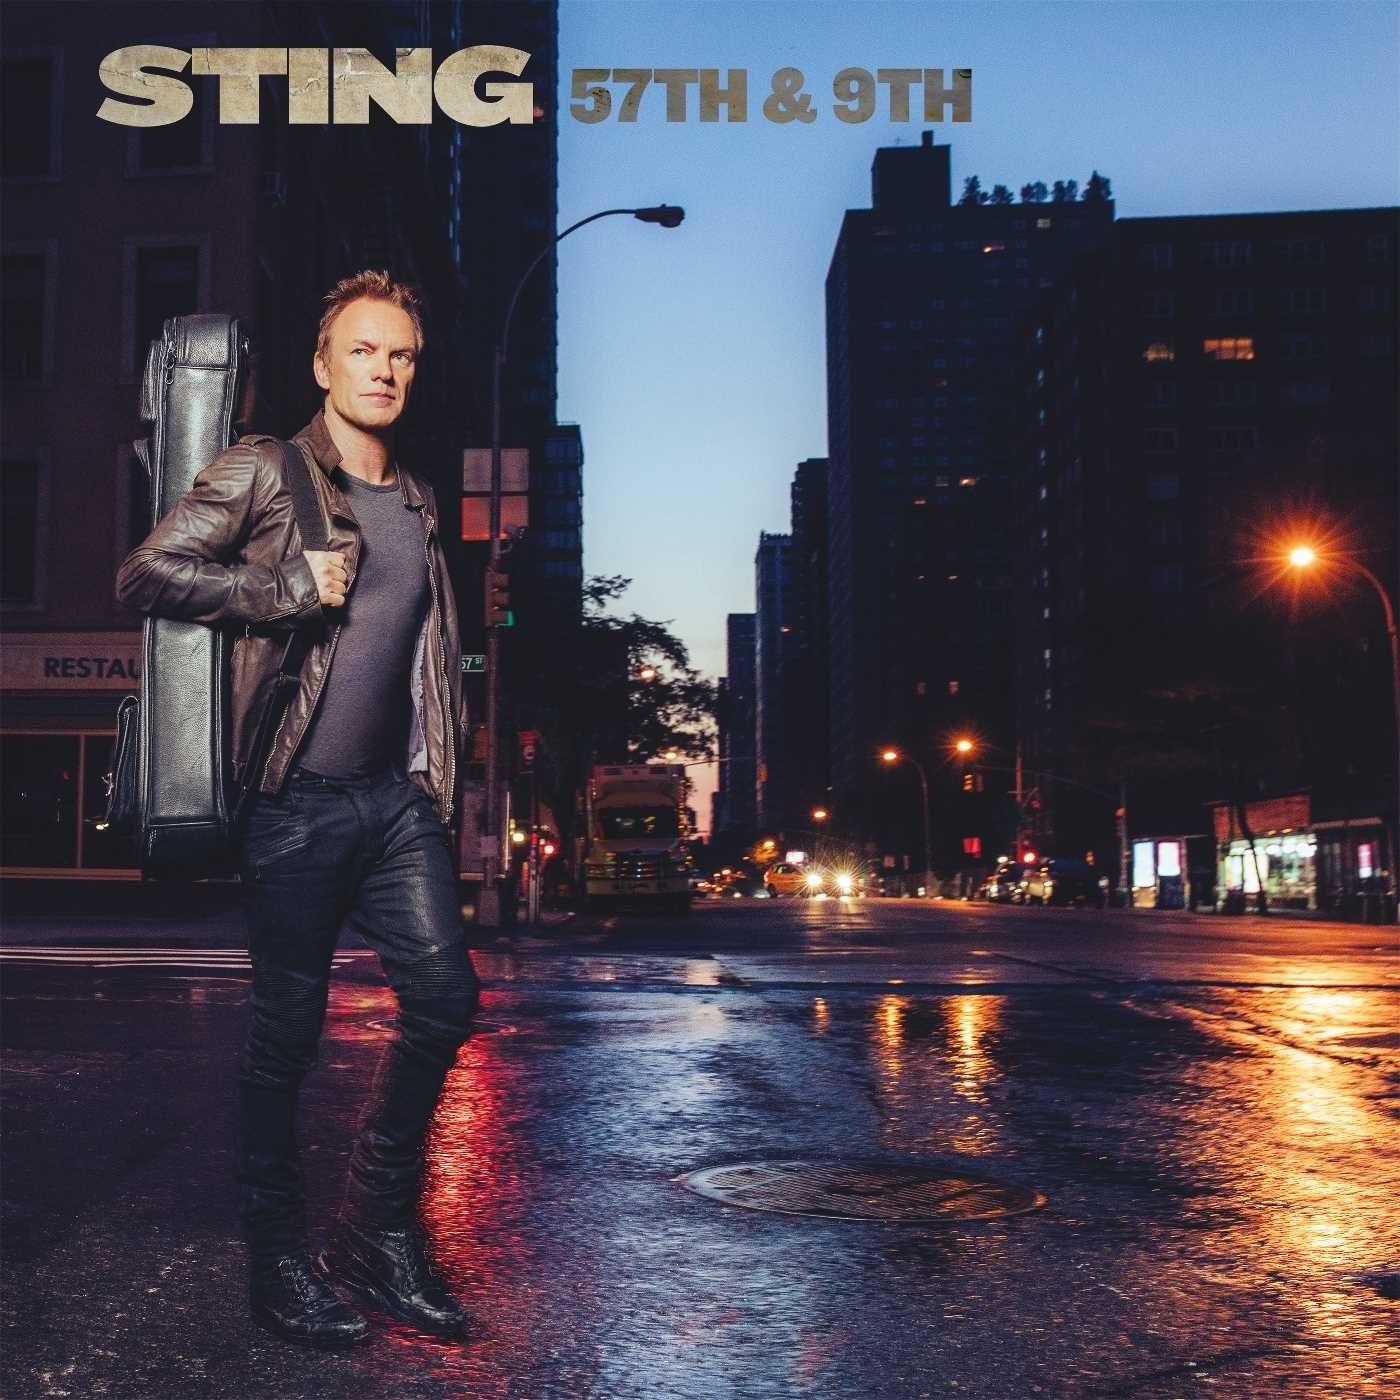 STING - 57TH & 9TH cover 